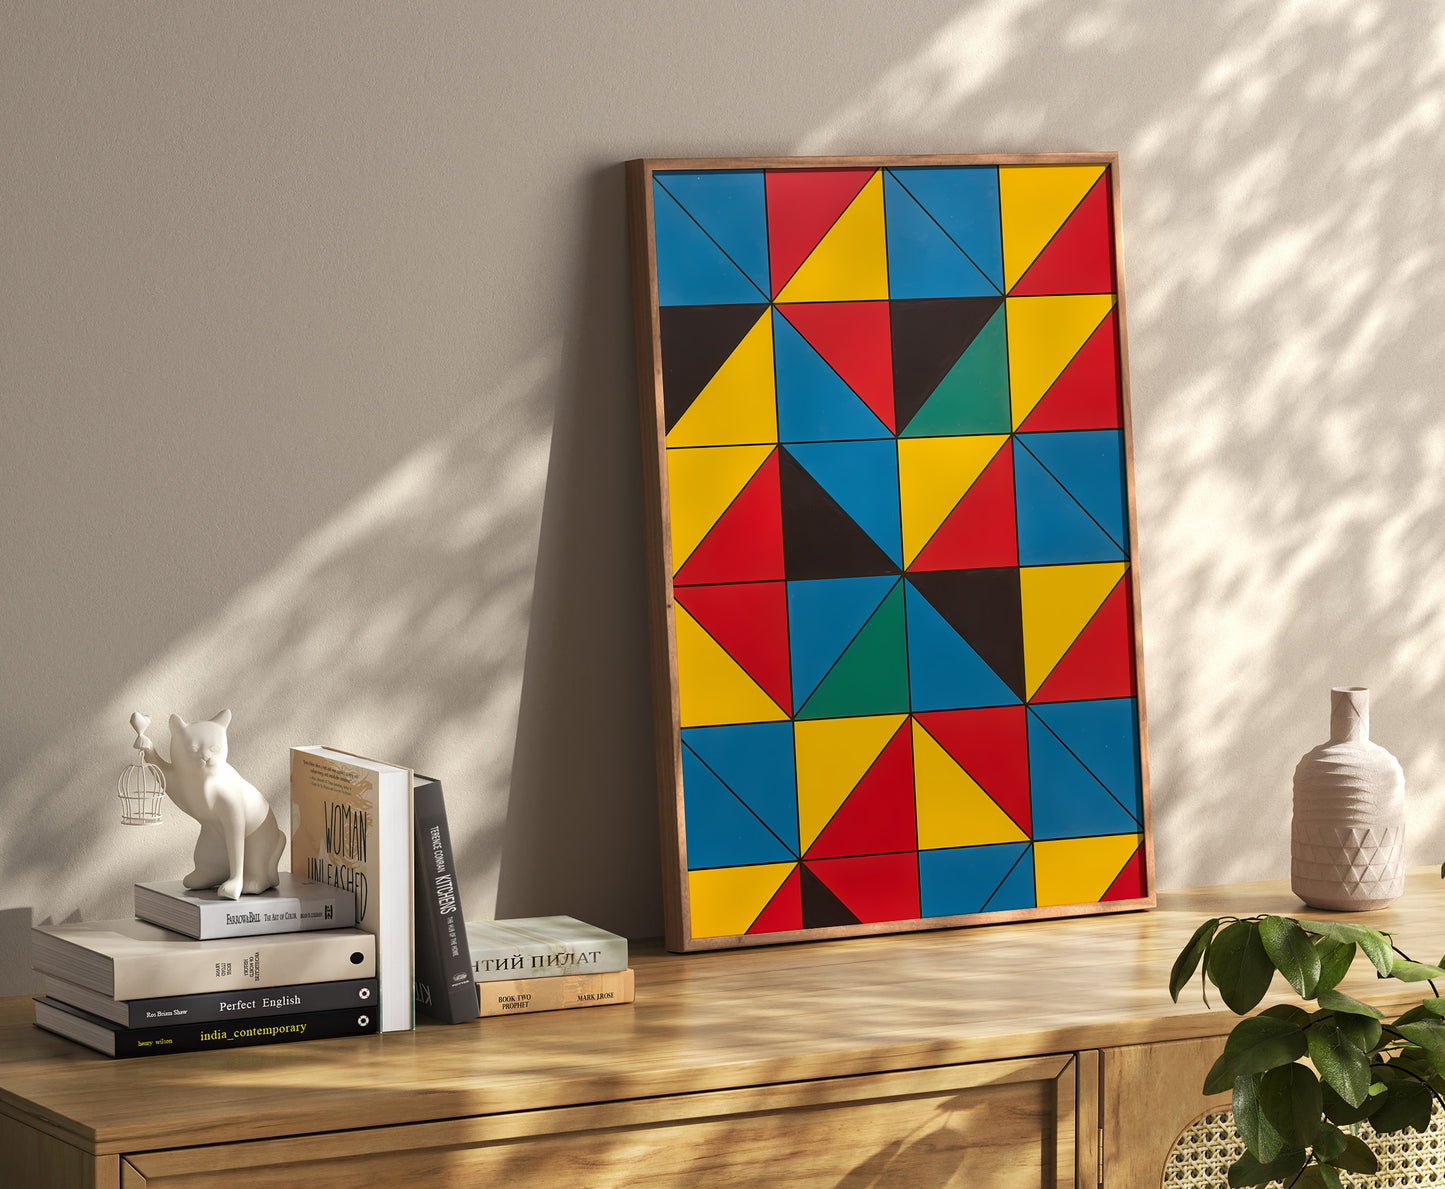 Colorful geometric abstract painting leaning on a wall beside books and a small plant.